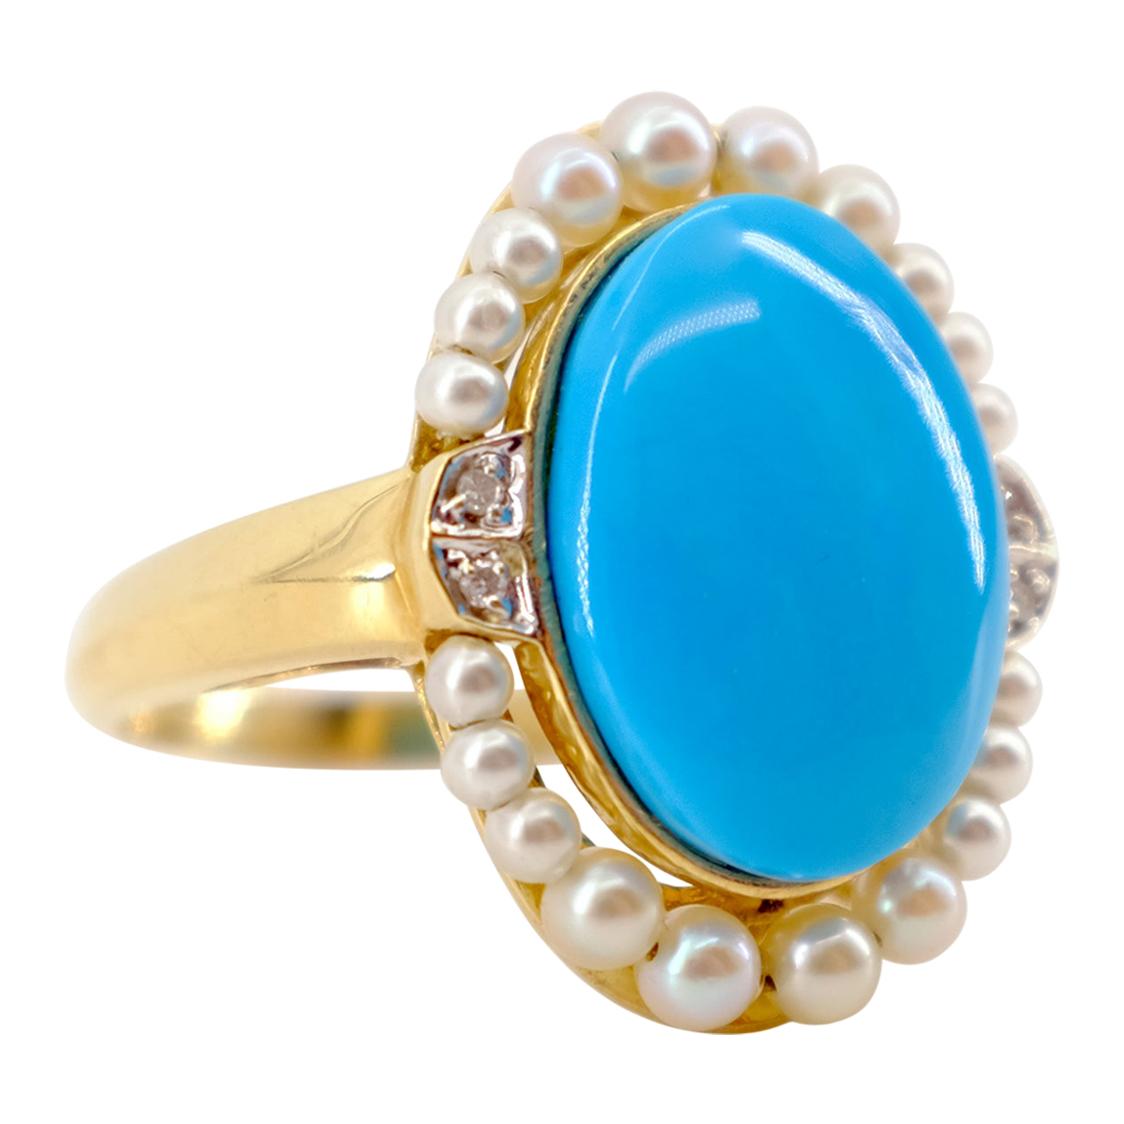 Turquoise and Pearl Ring in Yellow Gold with Diamonds